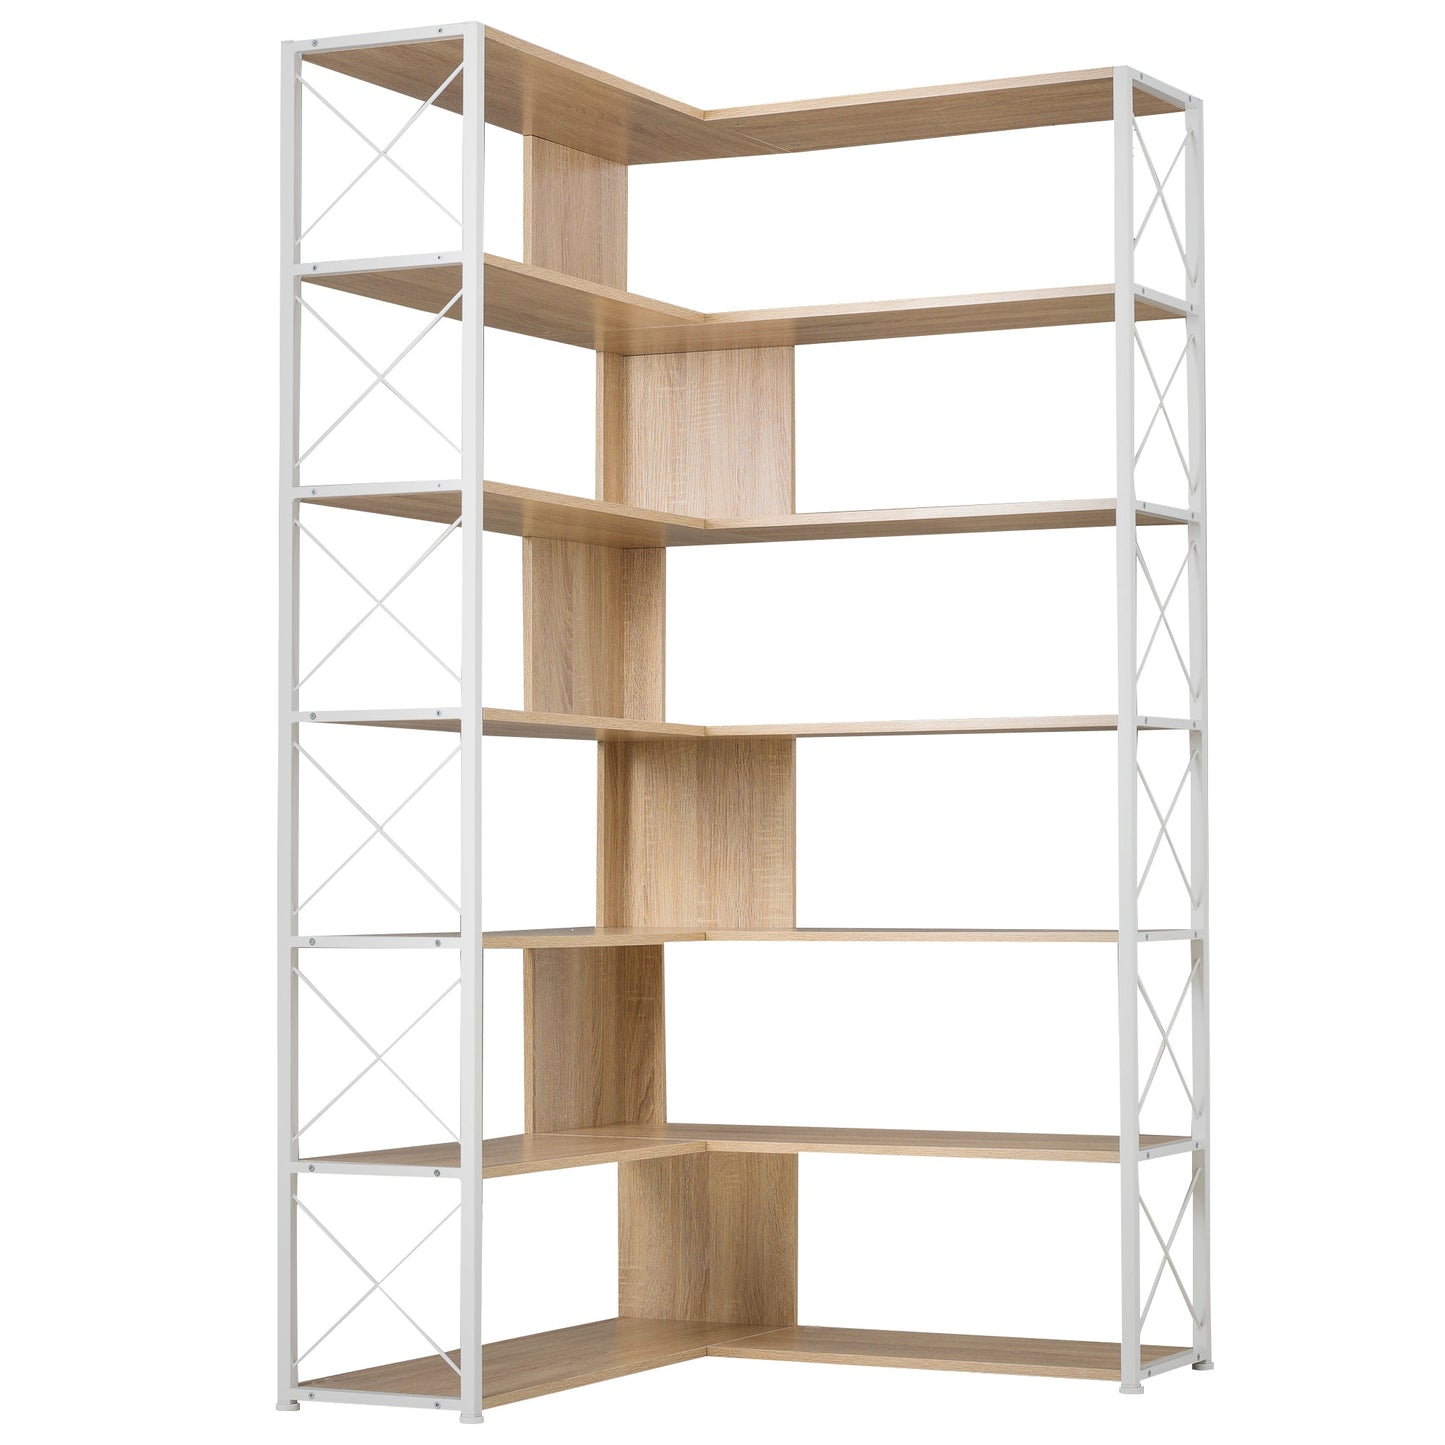 7-Tier Bookcase Home Office Bookshelf, L-Shaped Corner Bookcase with Metal Frame, Industrial Style Shelf with Open Storage, MDF Board - Groovy Boardz